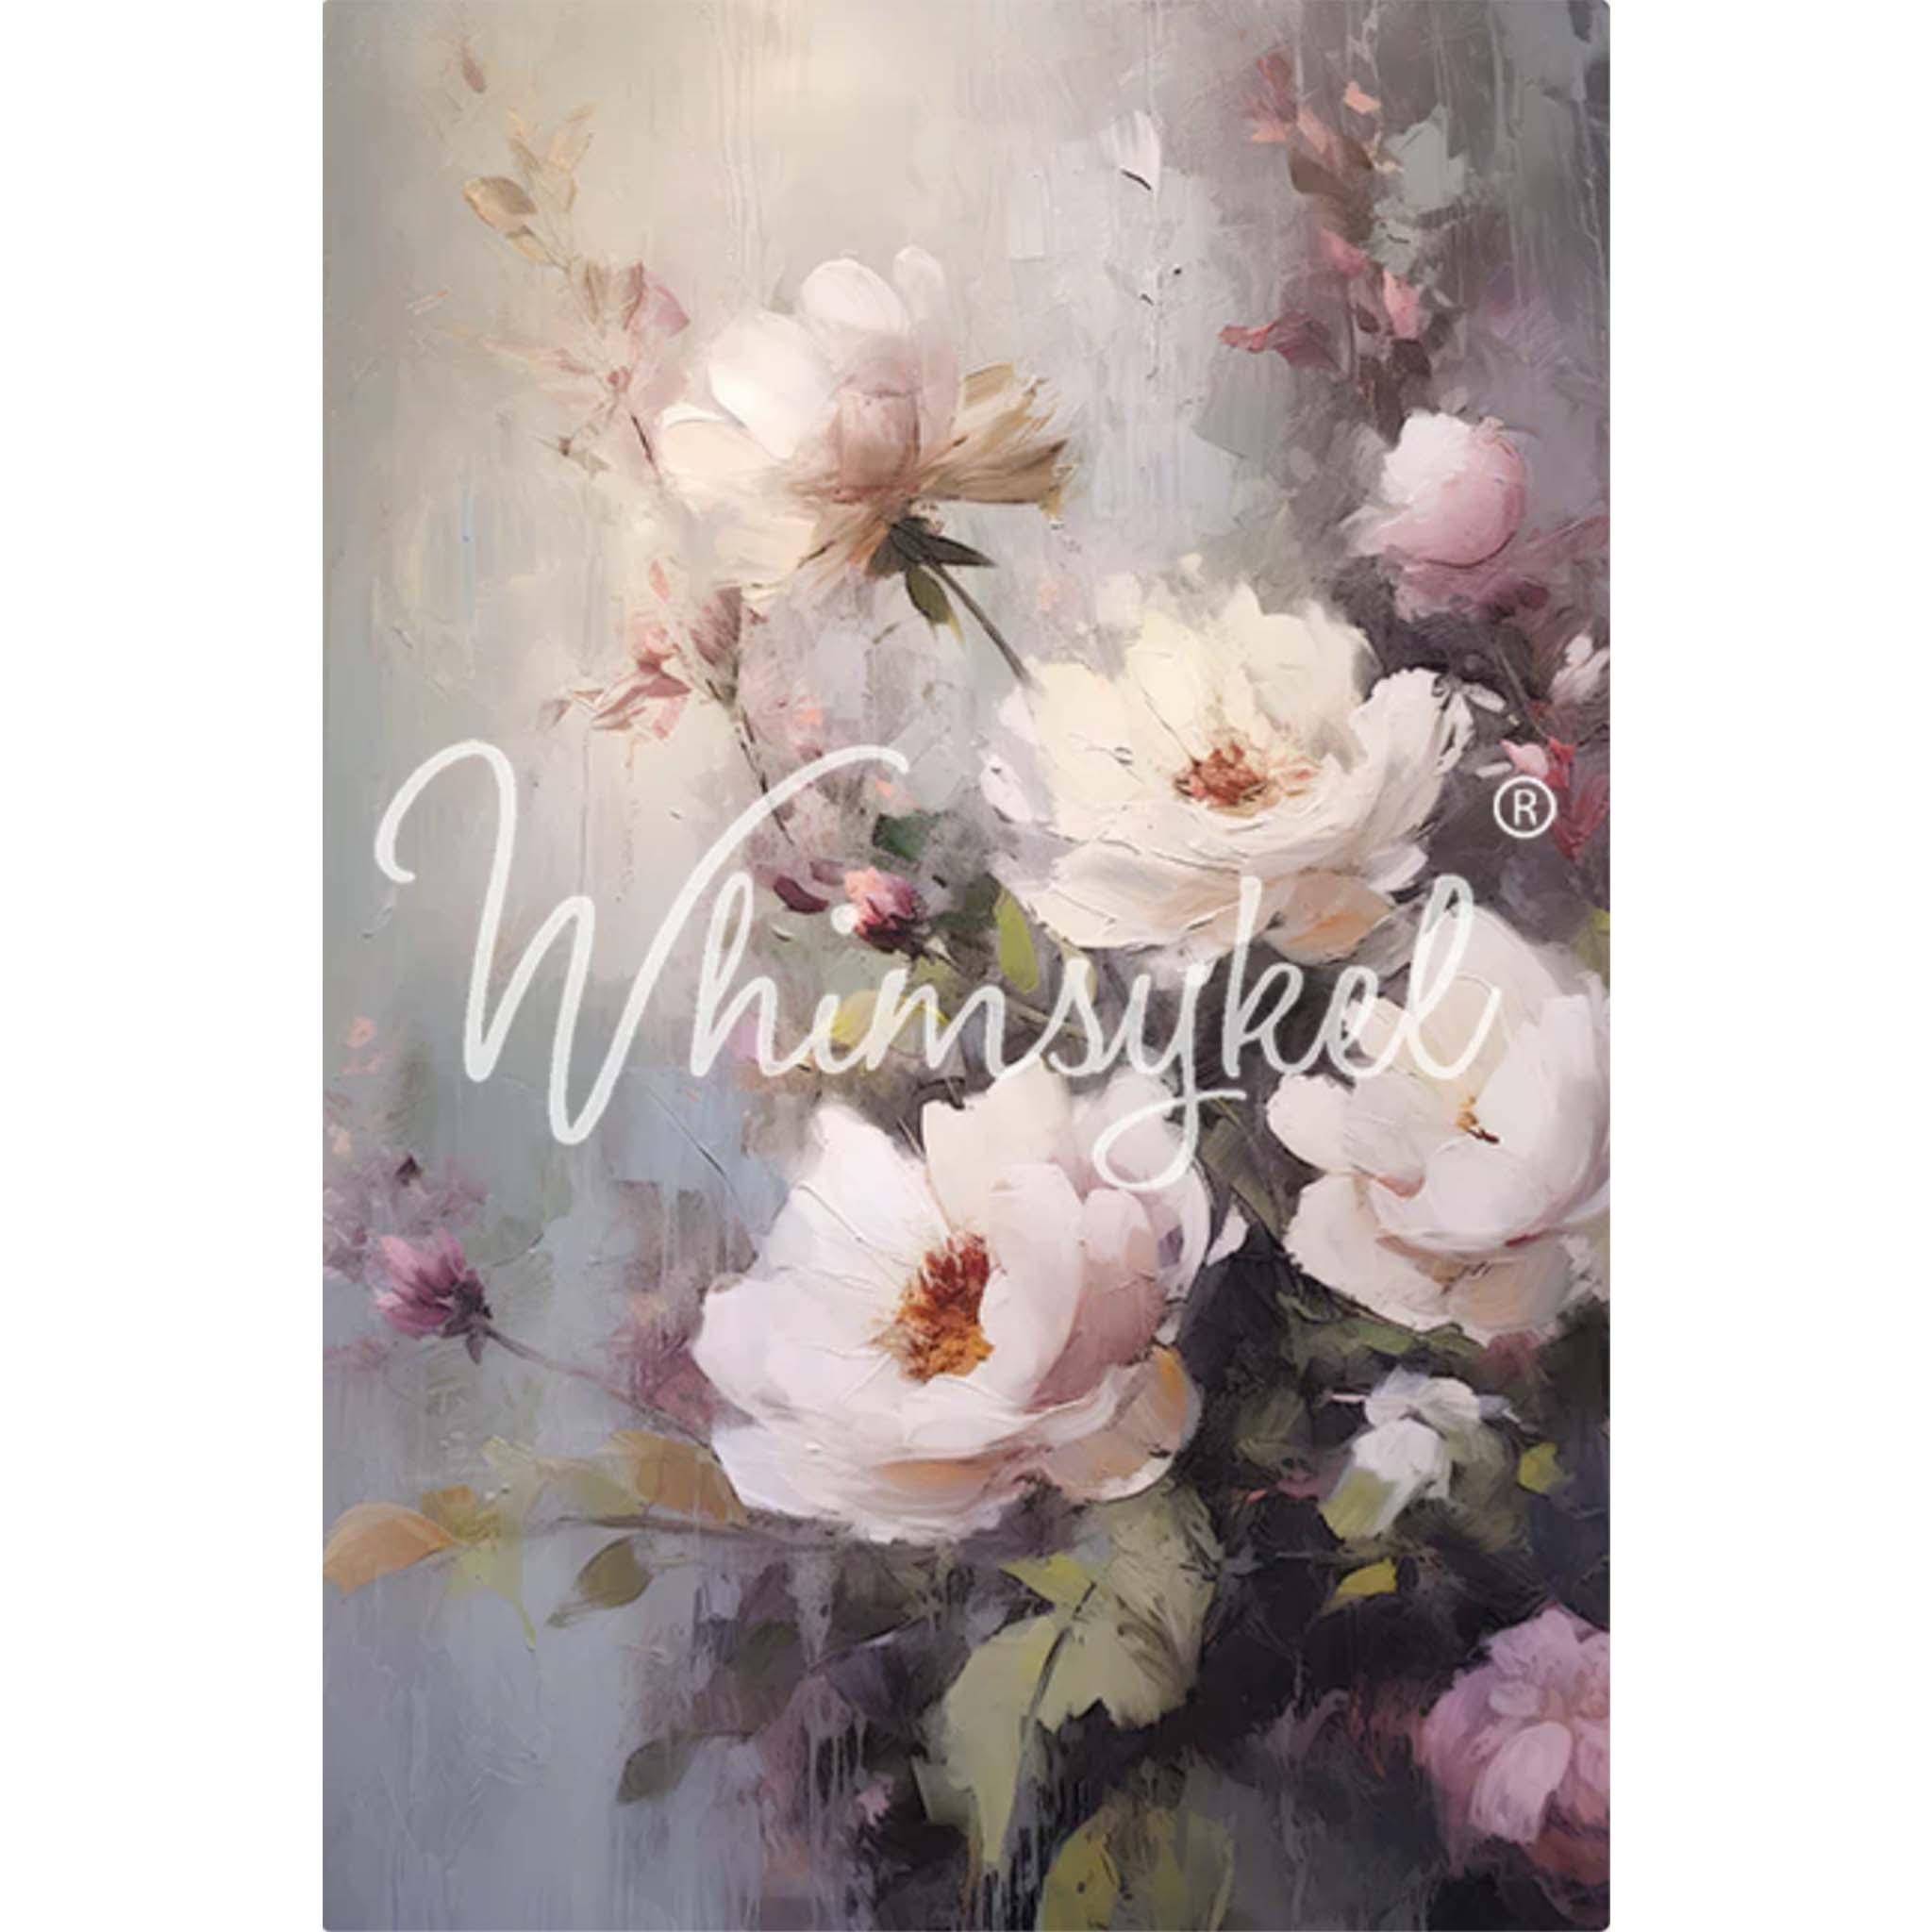 Tissue paper design that features a canvas style painting of a bundle of white and blush flowers resting on a gentle gray backdrop. White borders are on the sides.